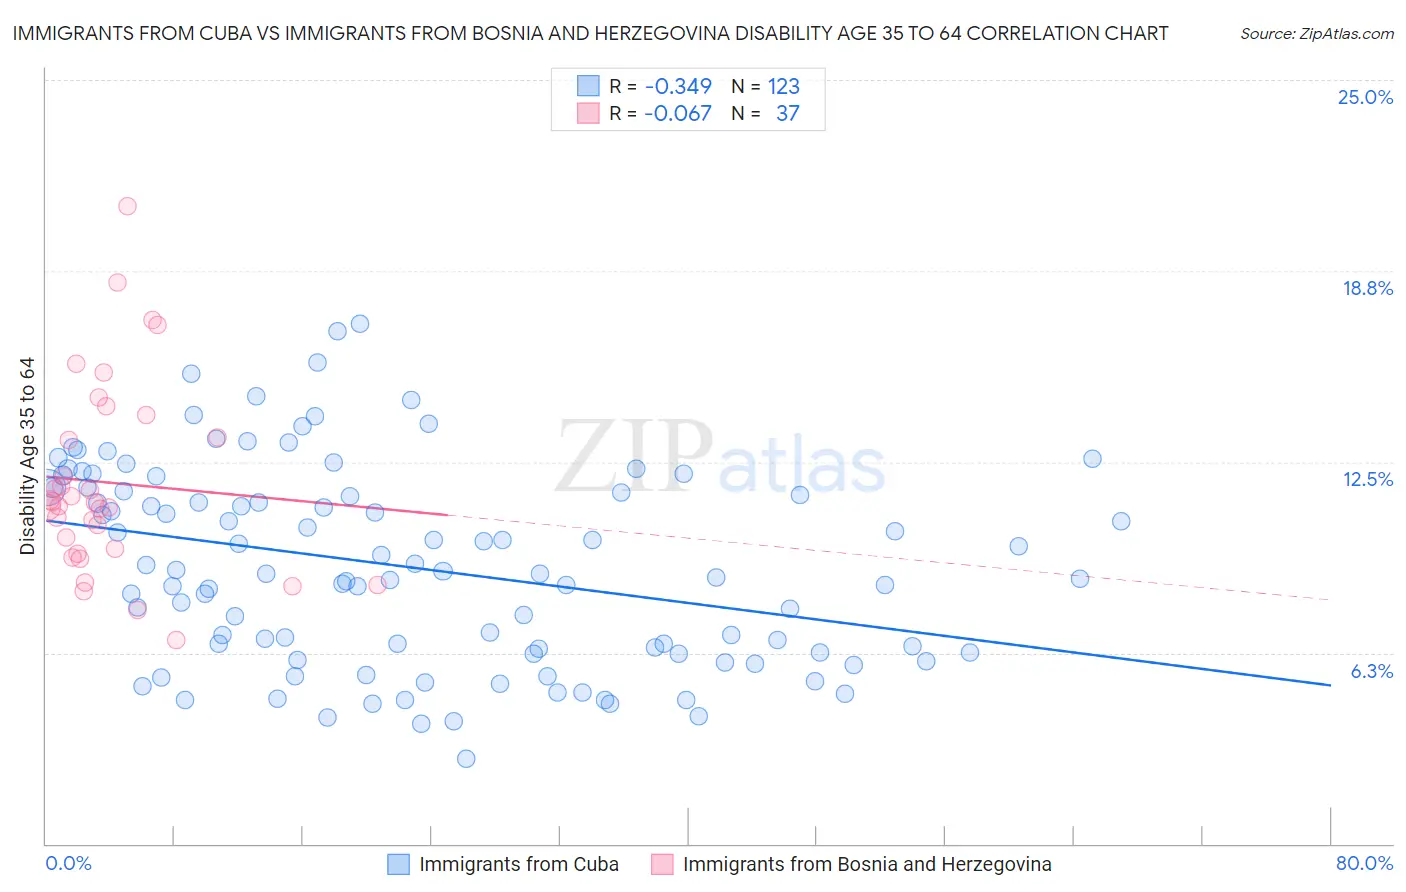 Immigrants from Cuba vs Immigrants from Bosnia and Herzegovina Disability Age 35 to 64